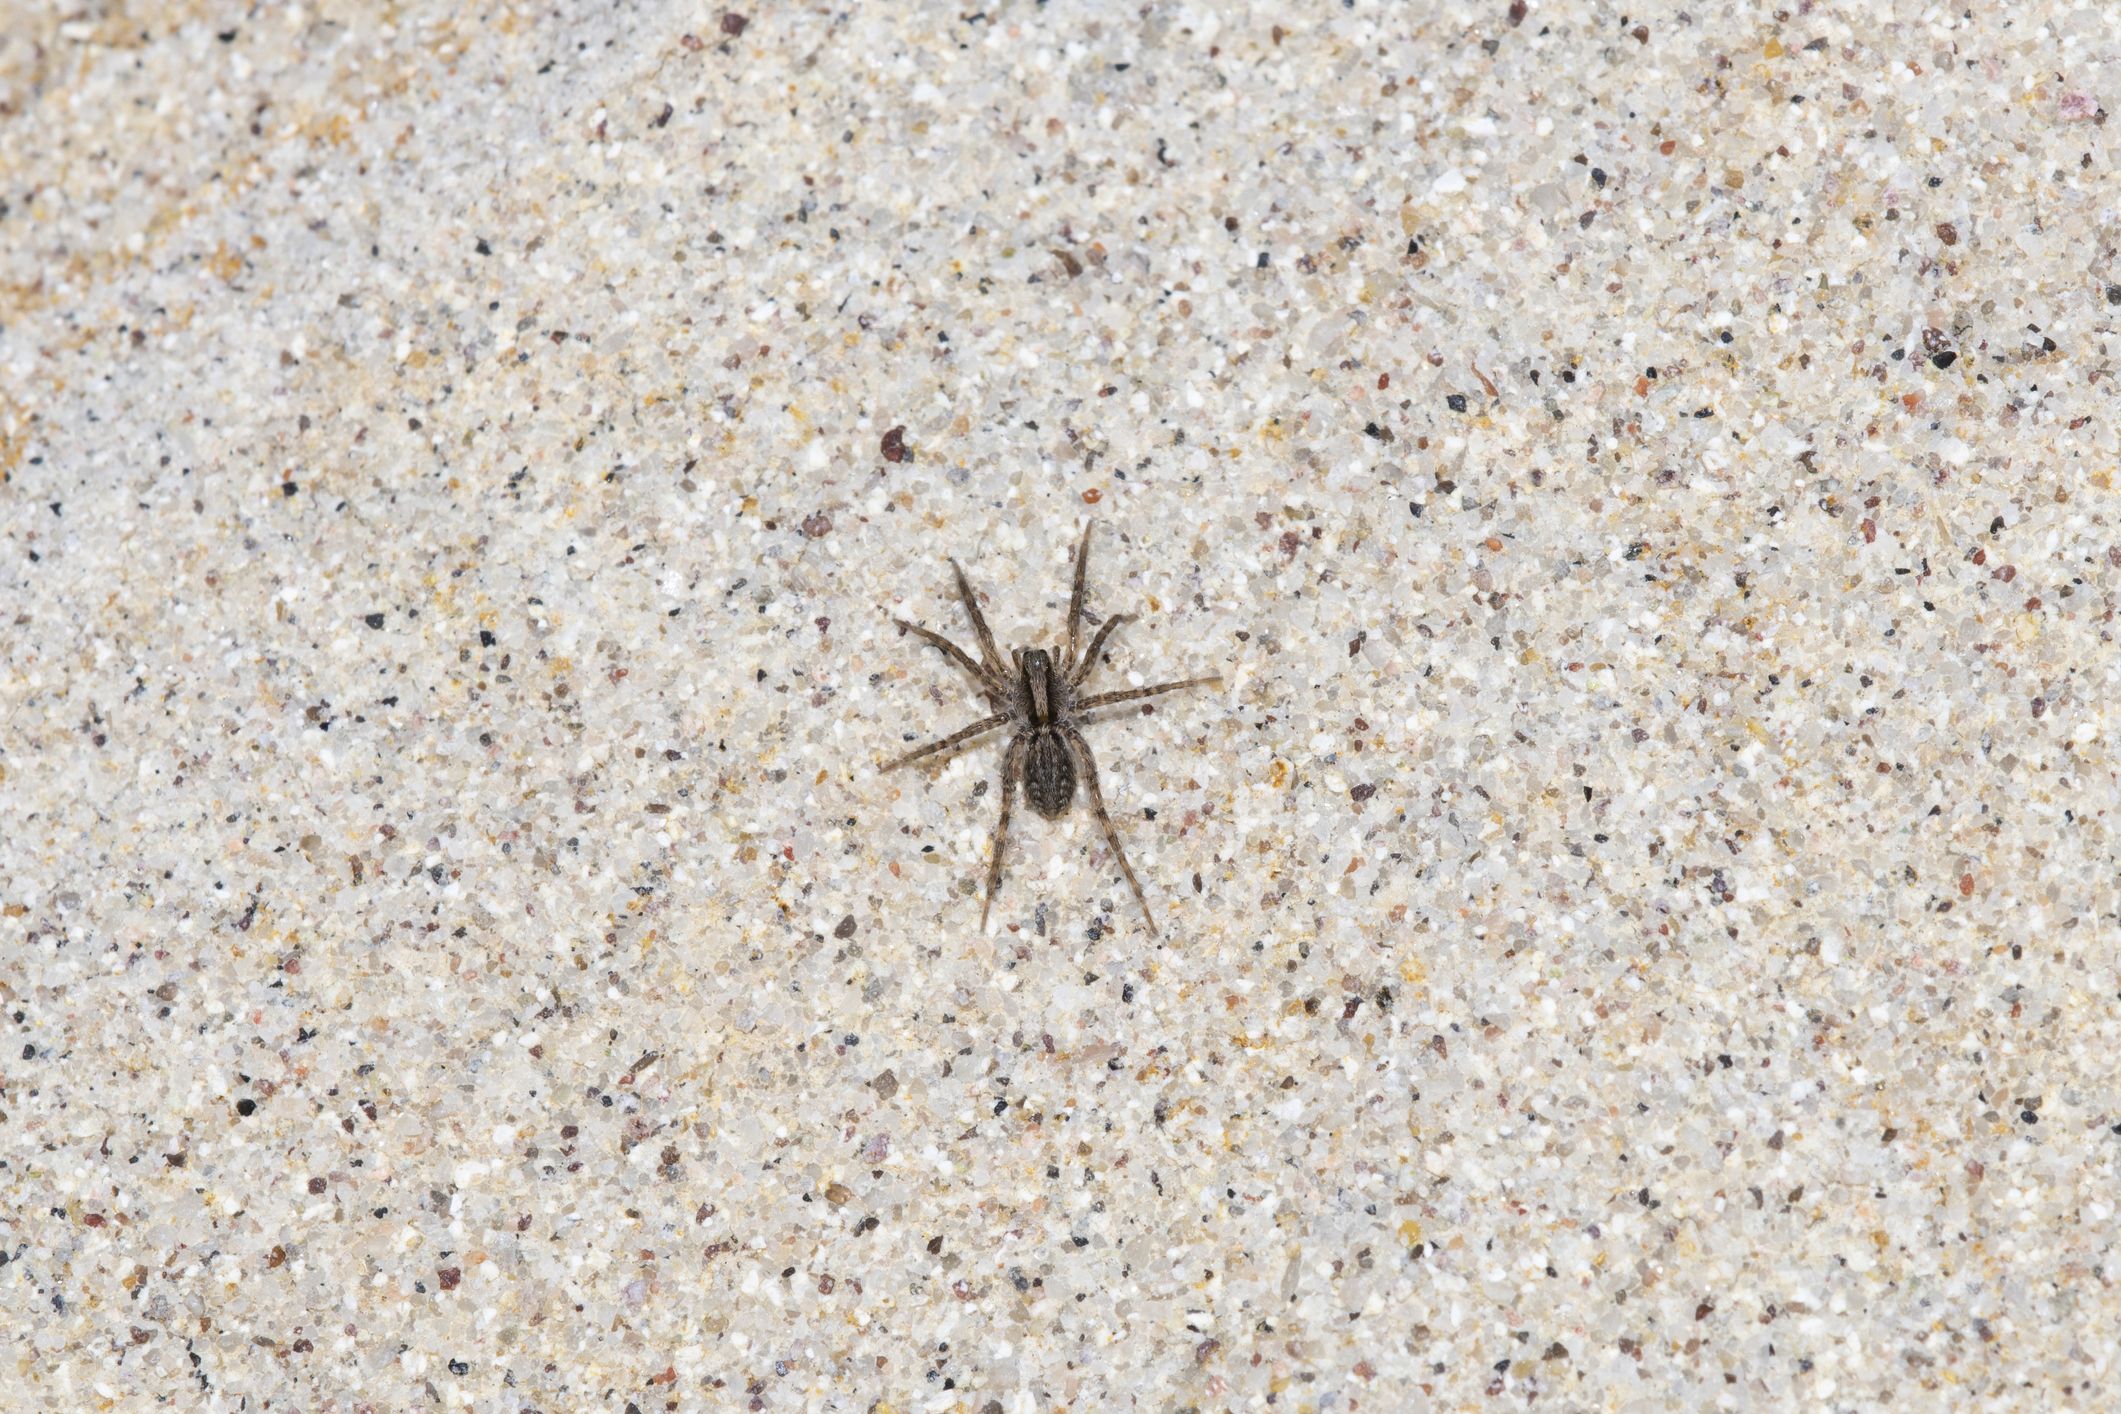 Grass Spider On A Verical Sandstone Wall On The Royalty Free Image 1568321649 